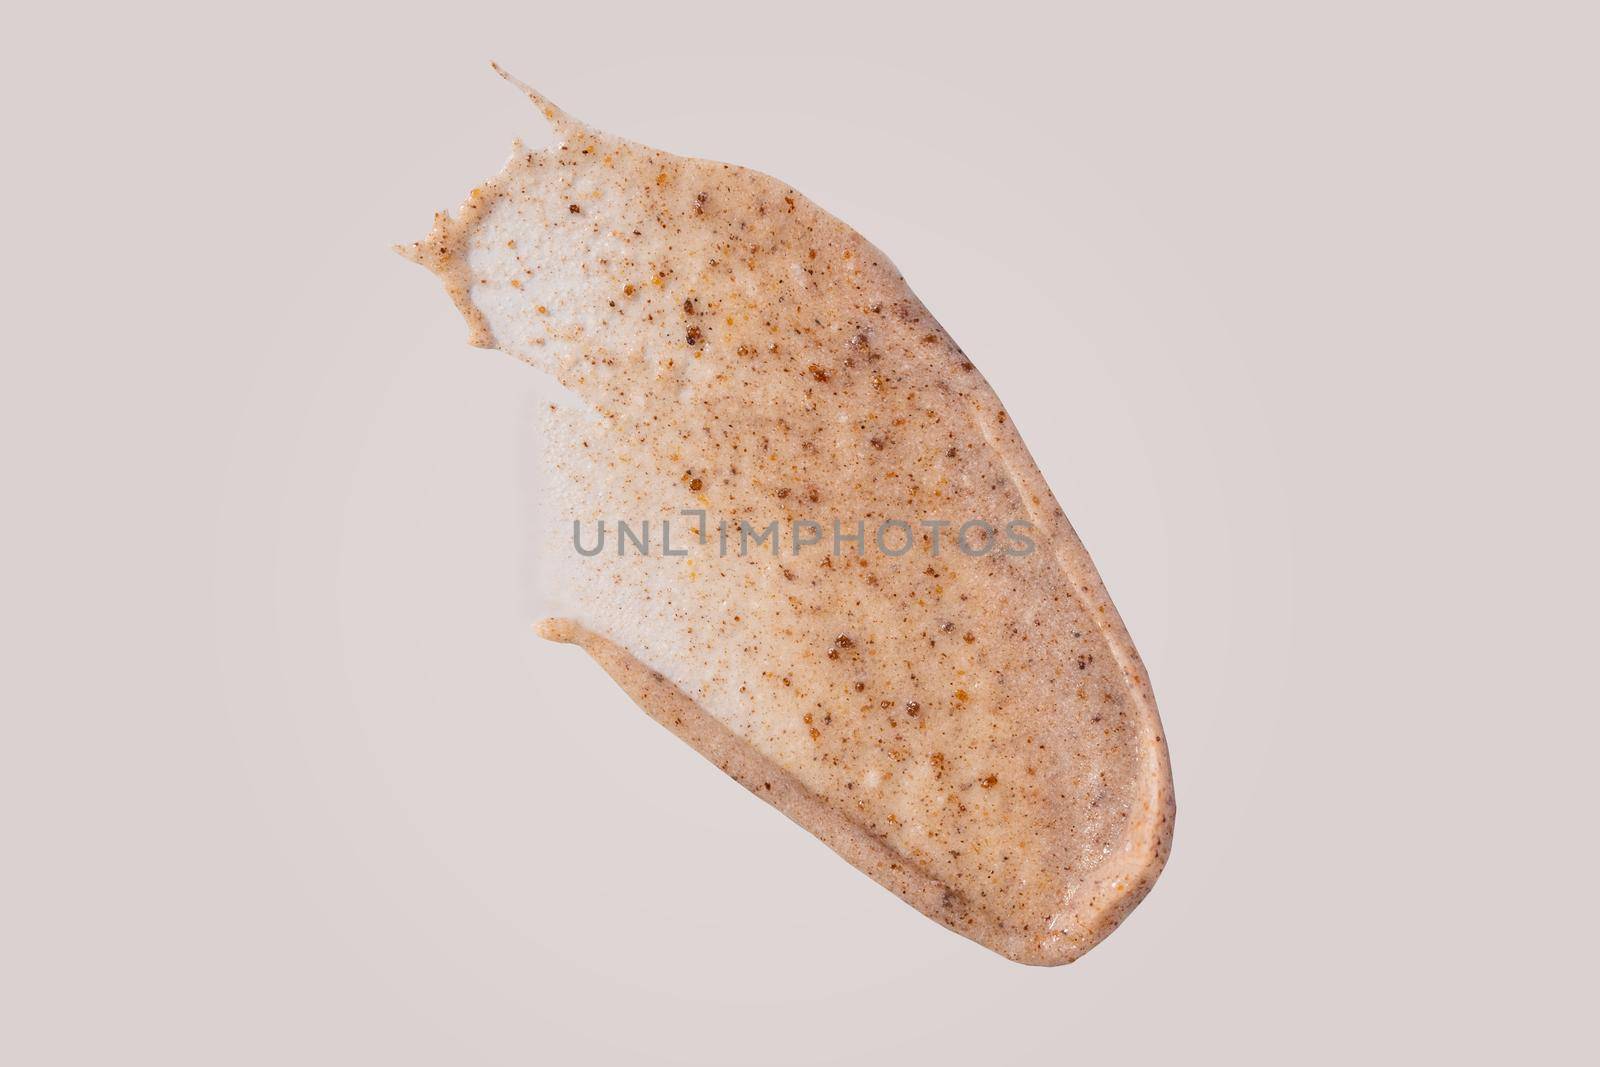 Scrub smear swatch isolated on beige background. Peeling cream smudge with exfoliating particles. Cosmetic skincare product with abrasive particle sample, gentle nude scrub texture isolate.